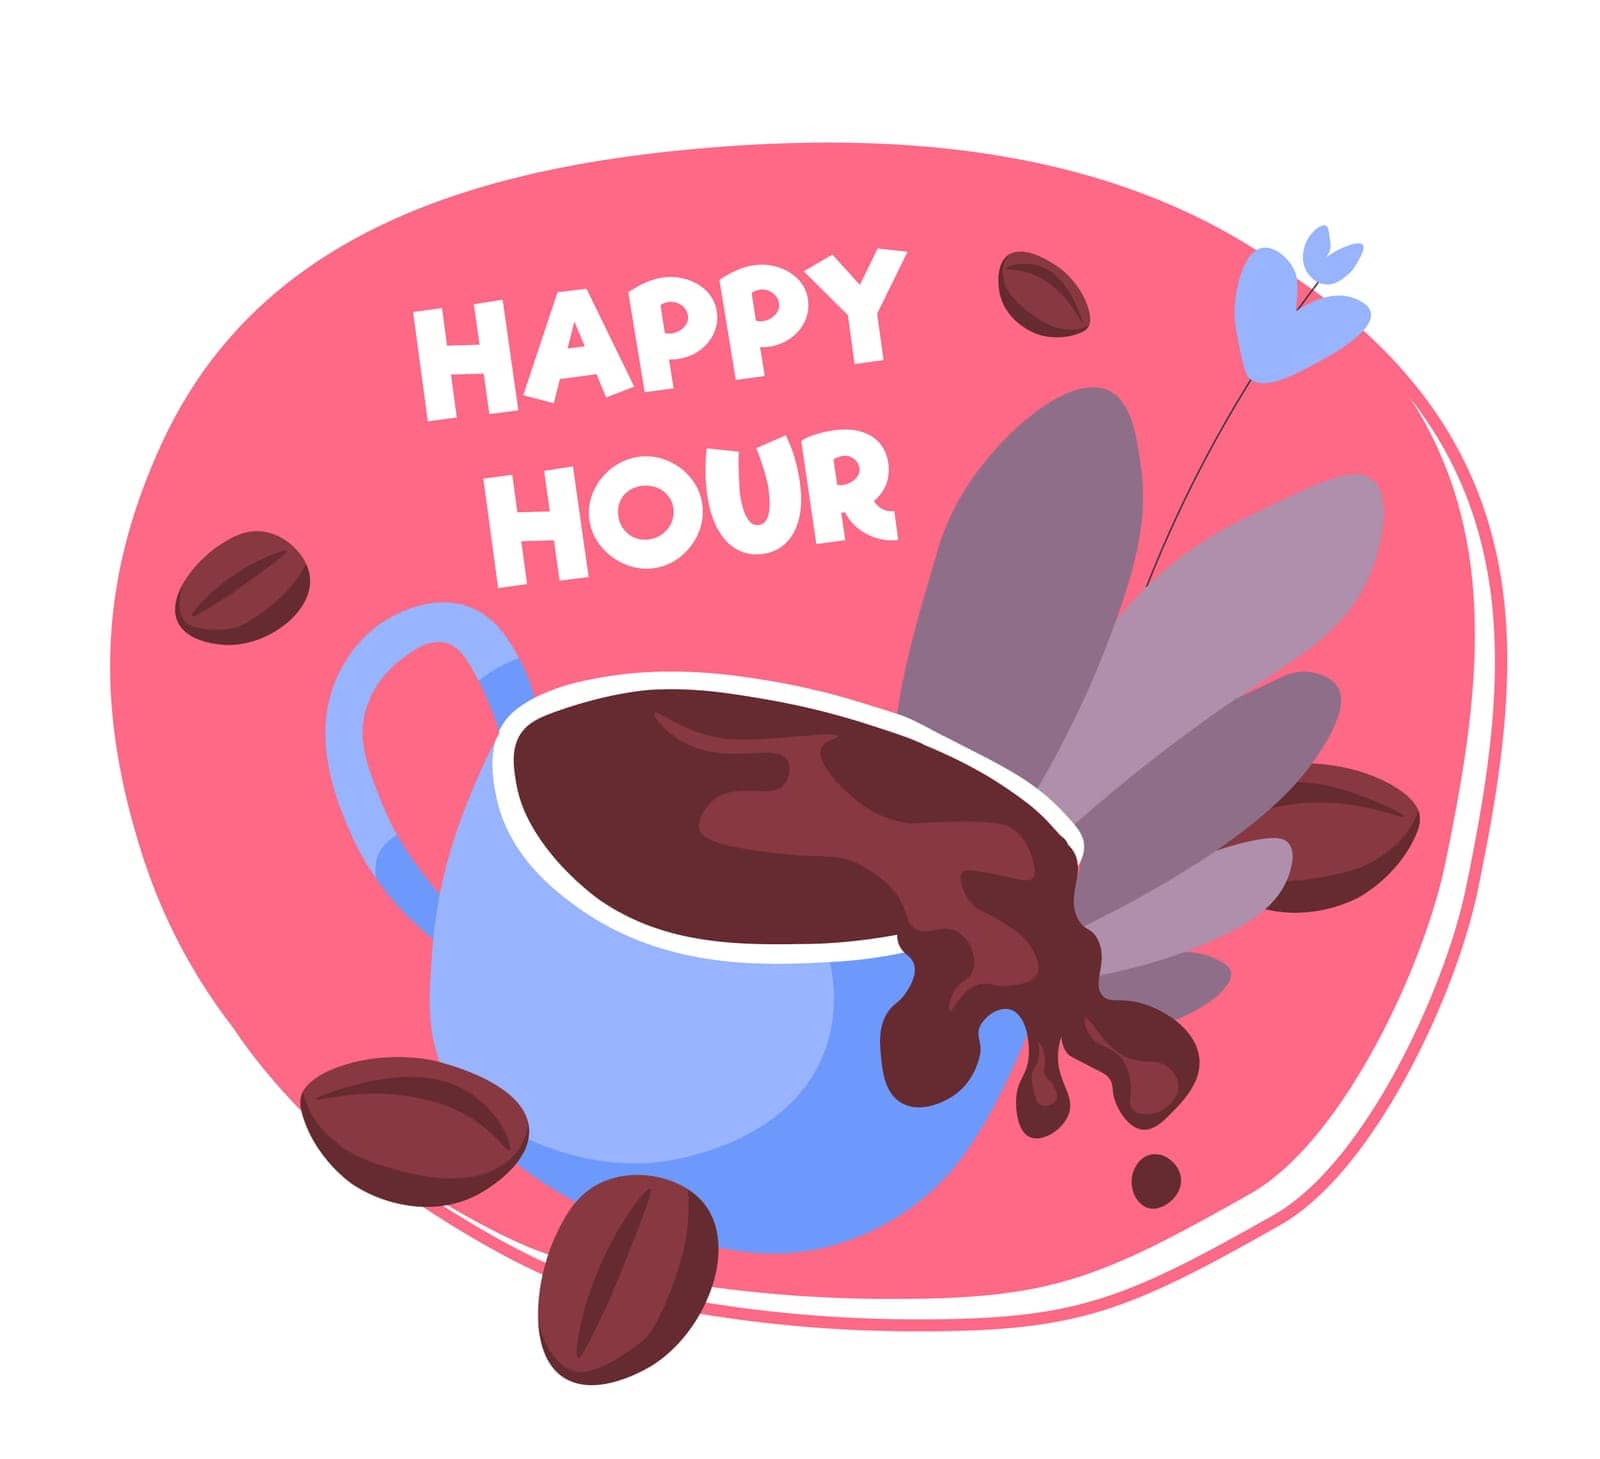 Coffee house happy hours, isolated badge or banner with cup of aromatic beverage and beans. Cafe or restaurant delicious drinks in menu. Americano or espresso in small mug. Vector in flat style